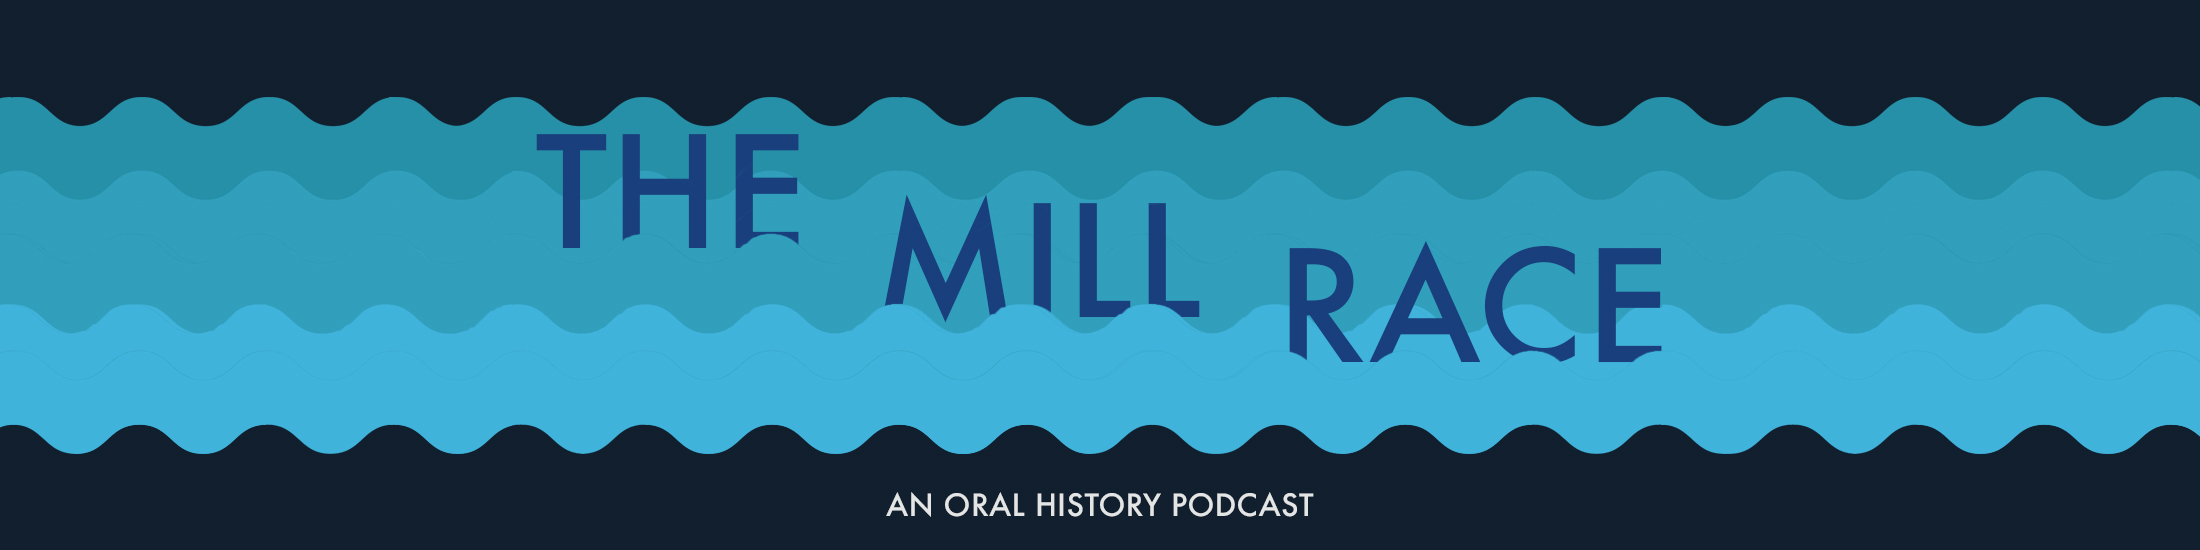 The Millrace banner image